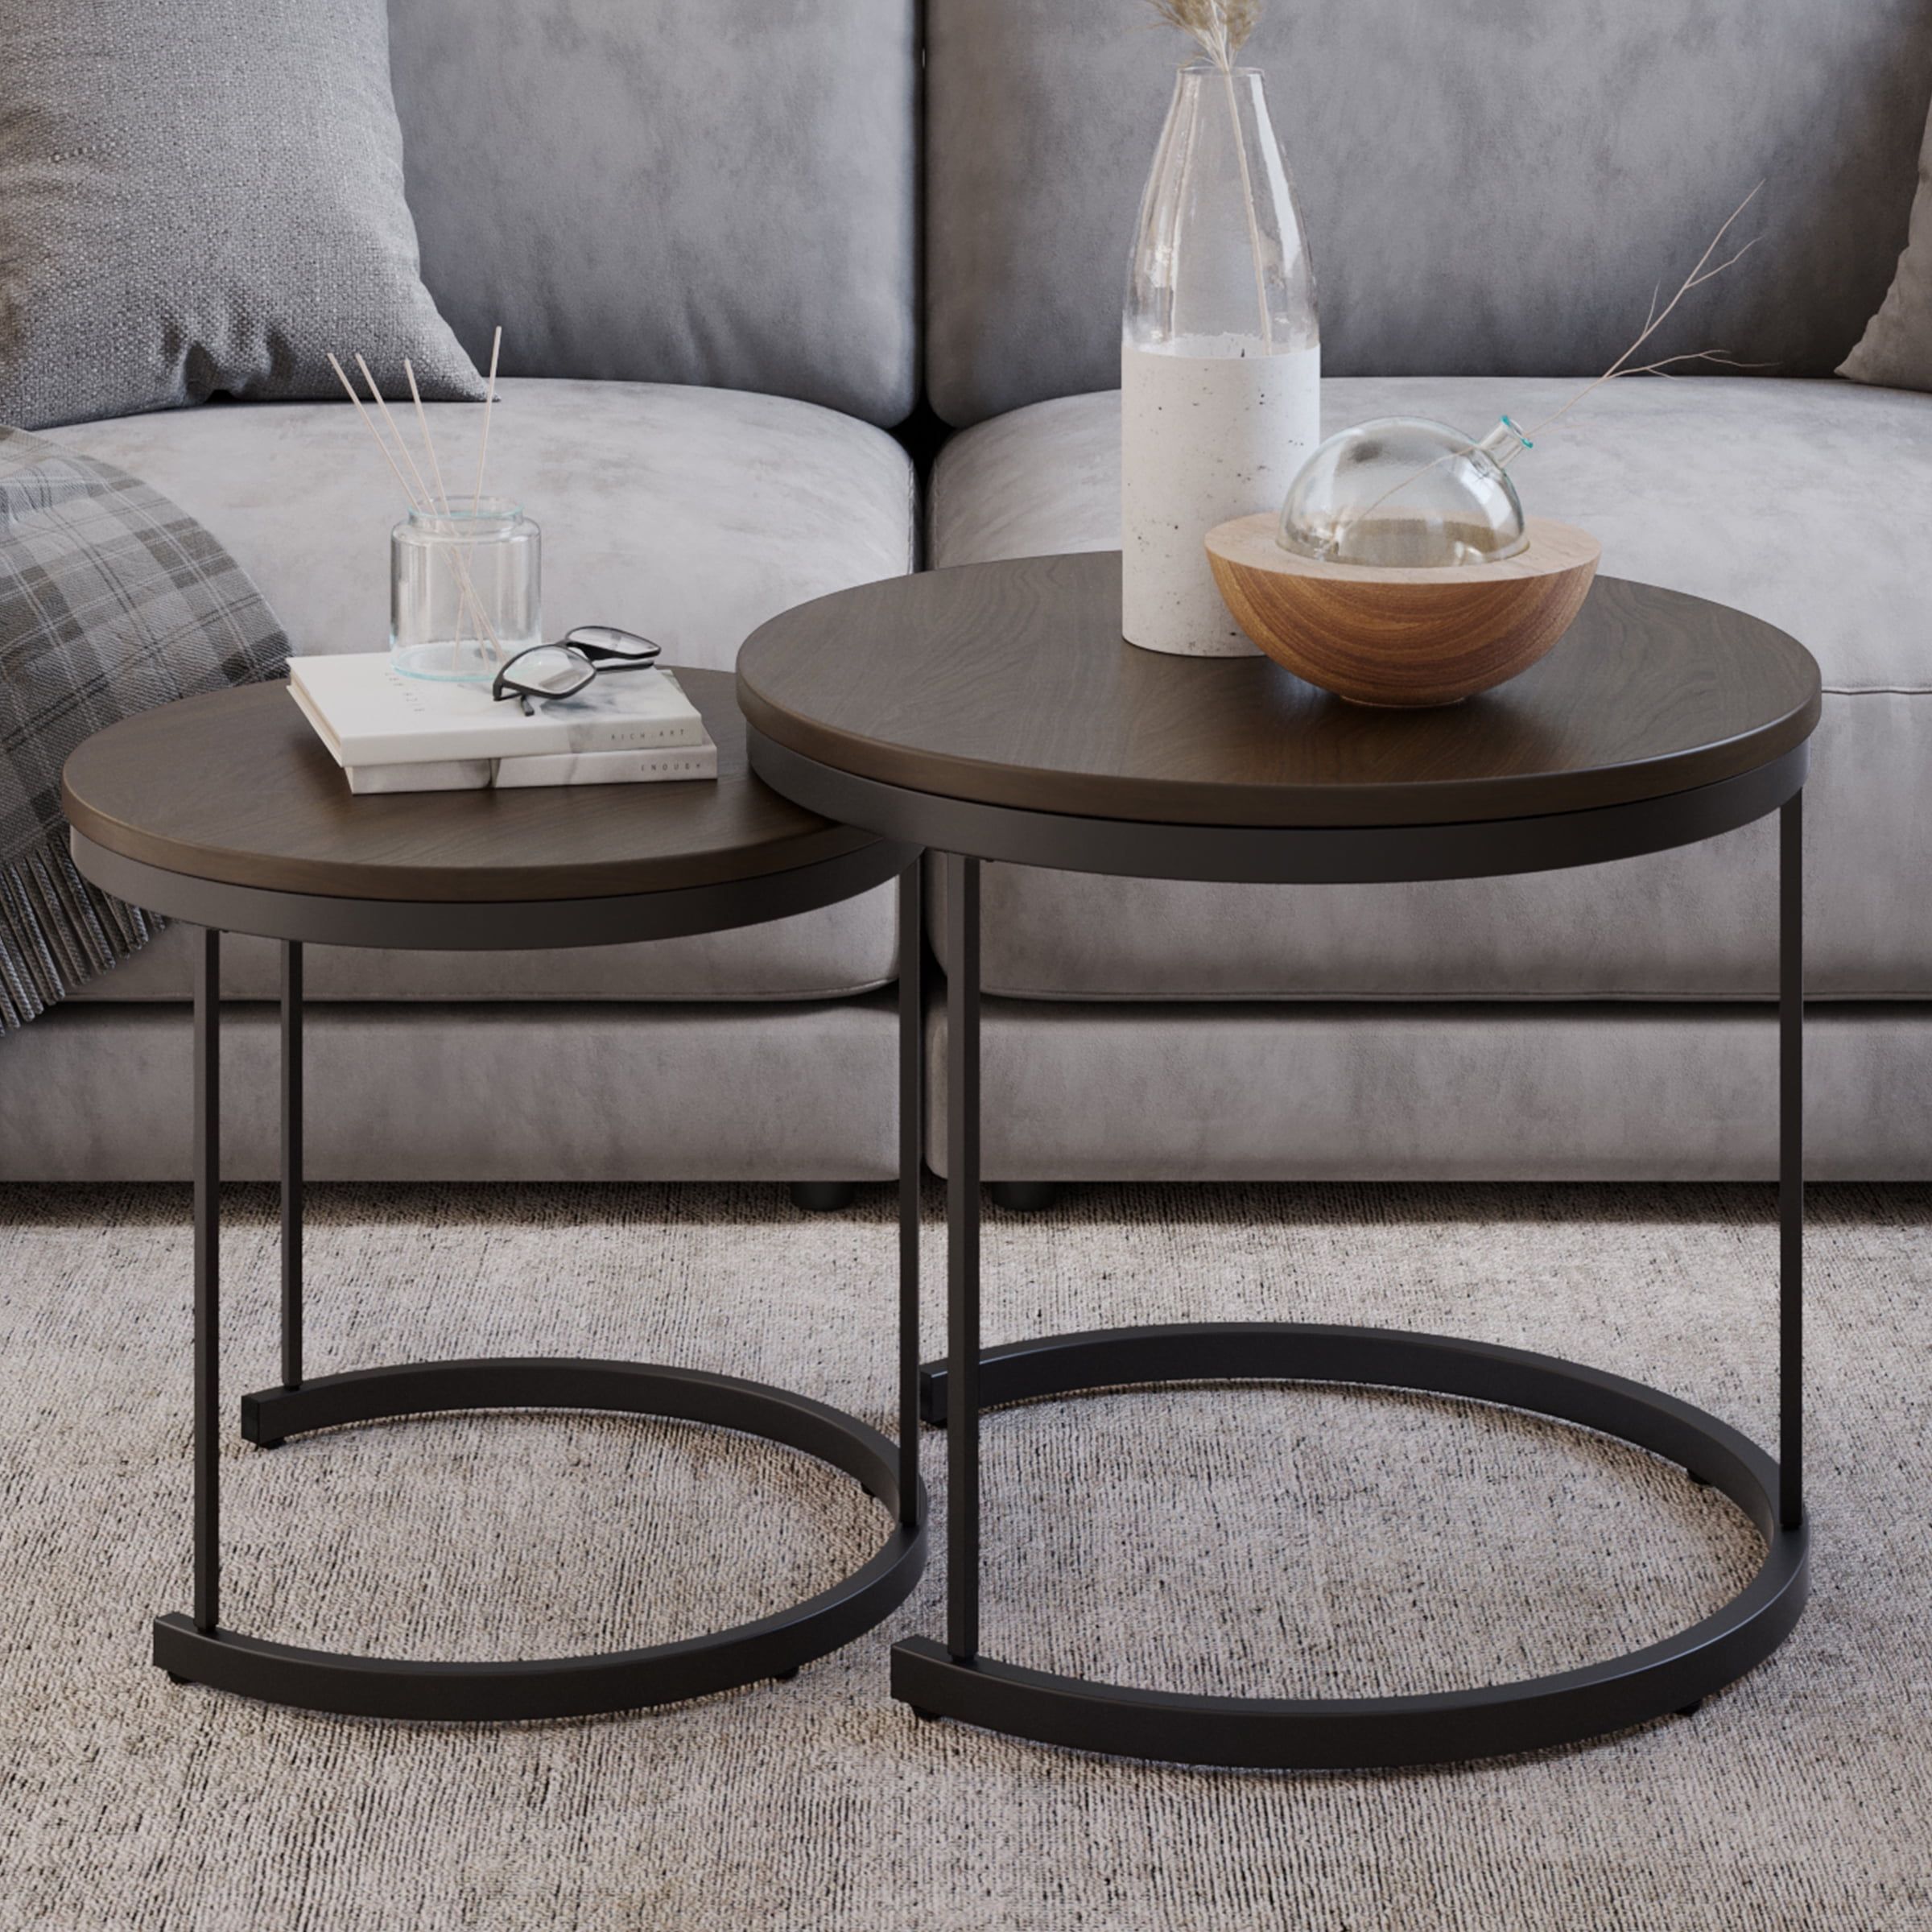 Lavish Home Nesting Coffee Table Small Round Tables Nest Together, Brown,  Set Of 2 – Walmart With Regard To Nesting Coffee Tables (View 3 of 15)